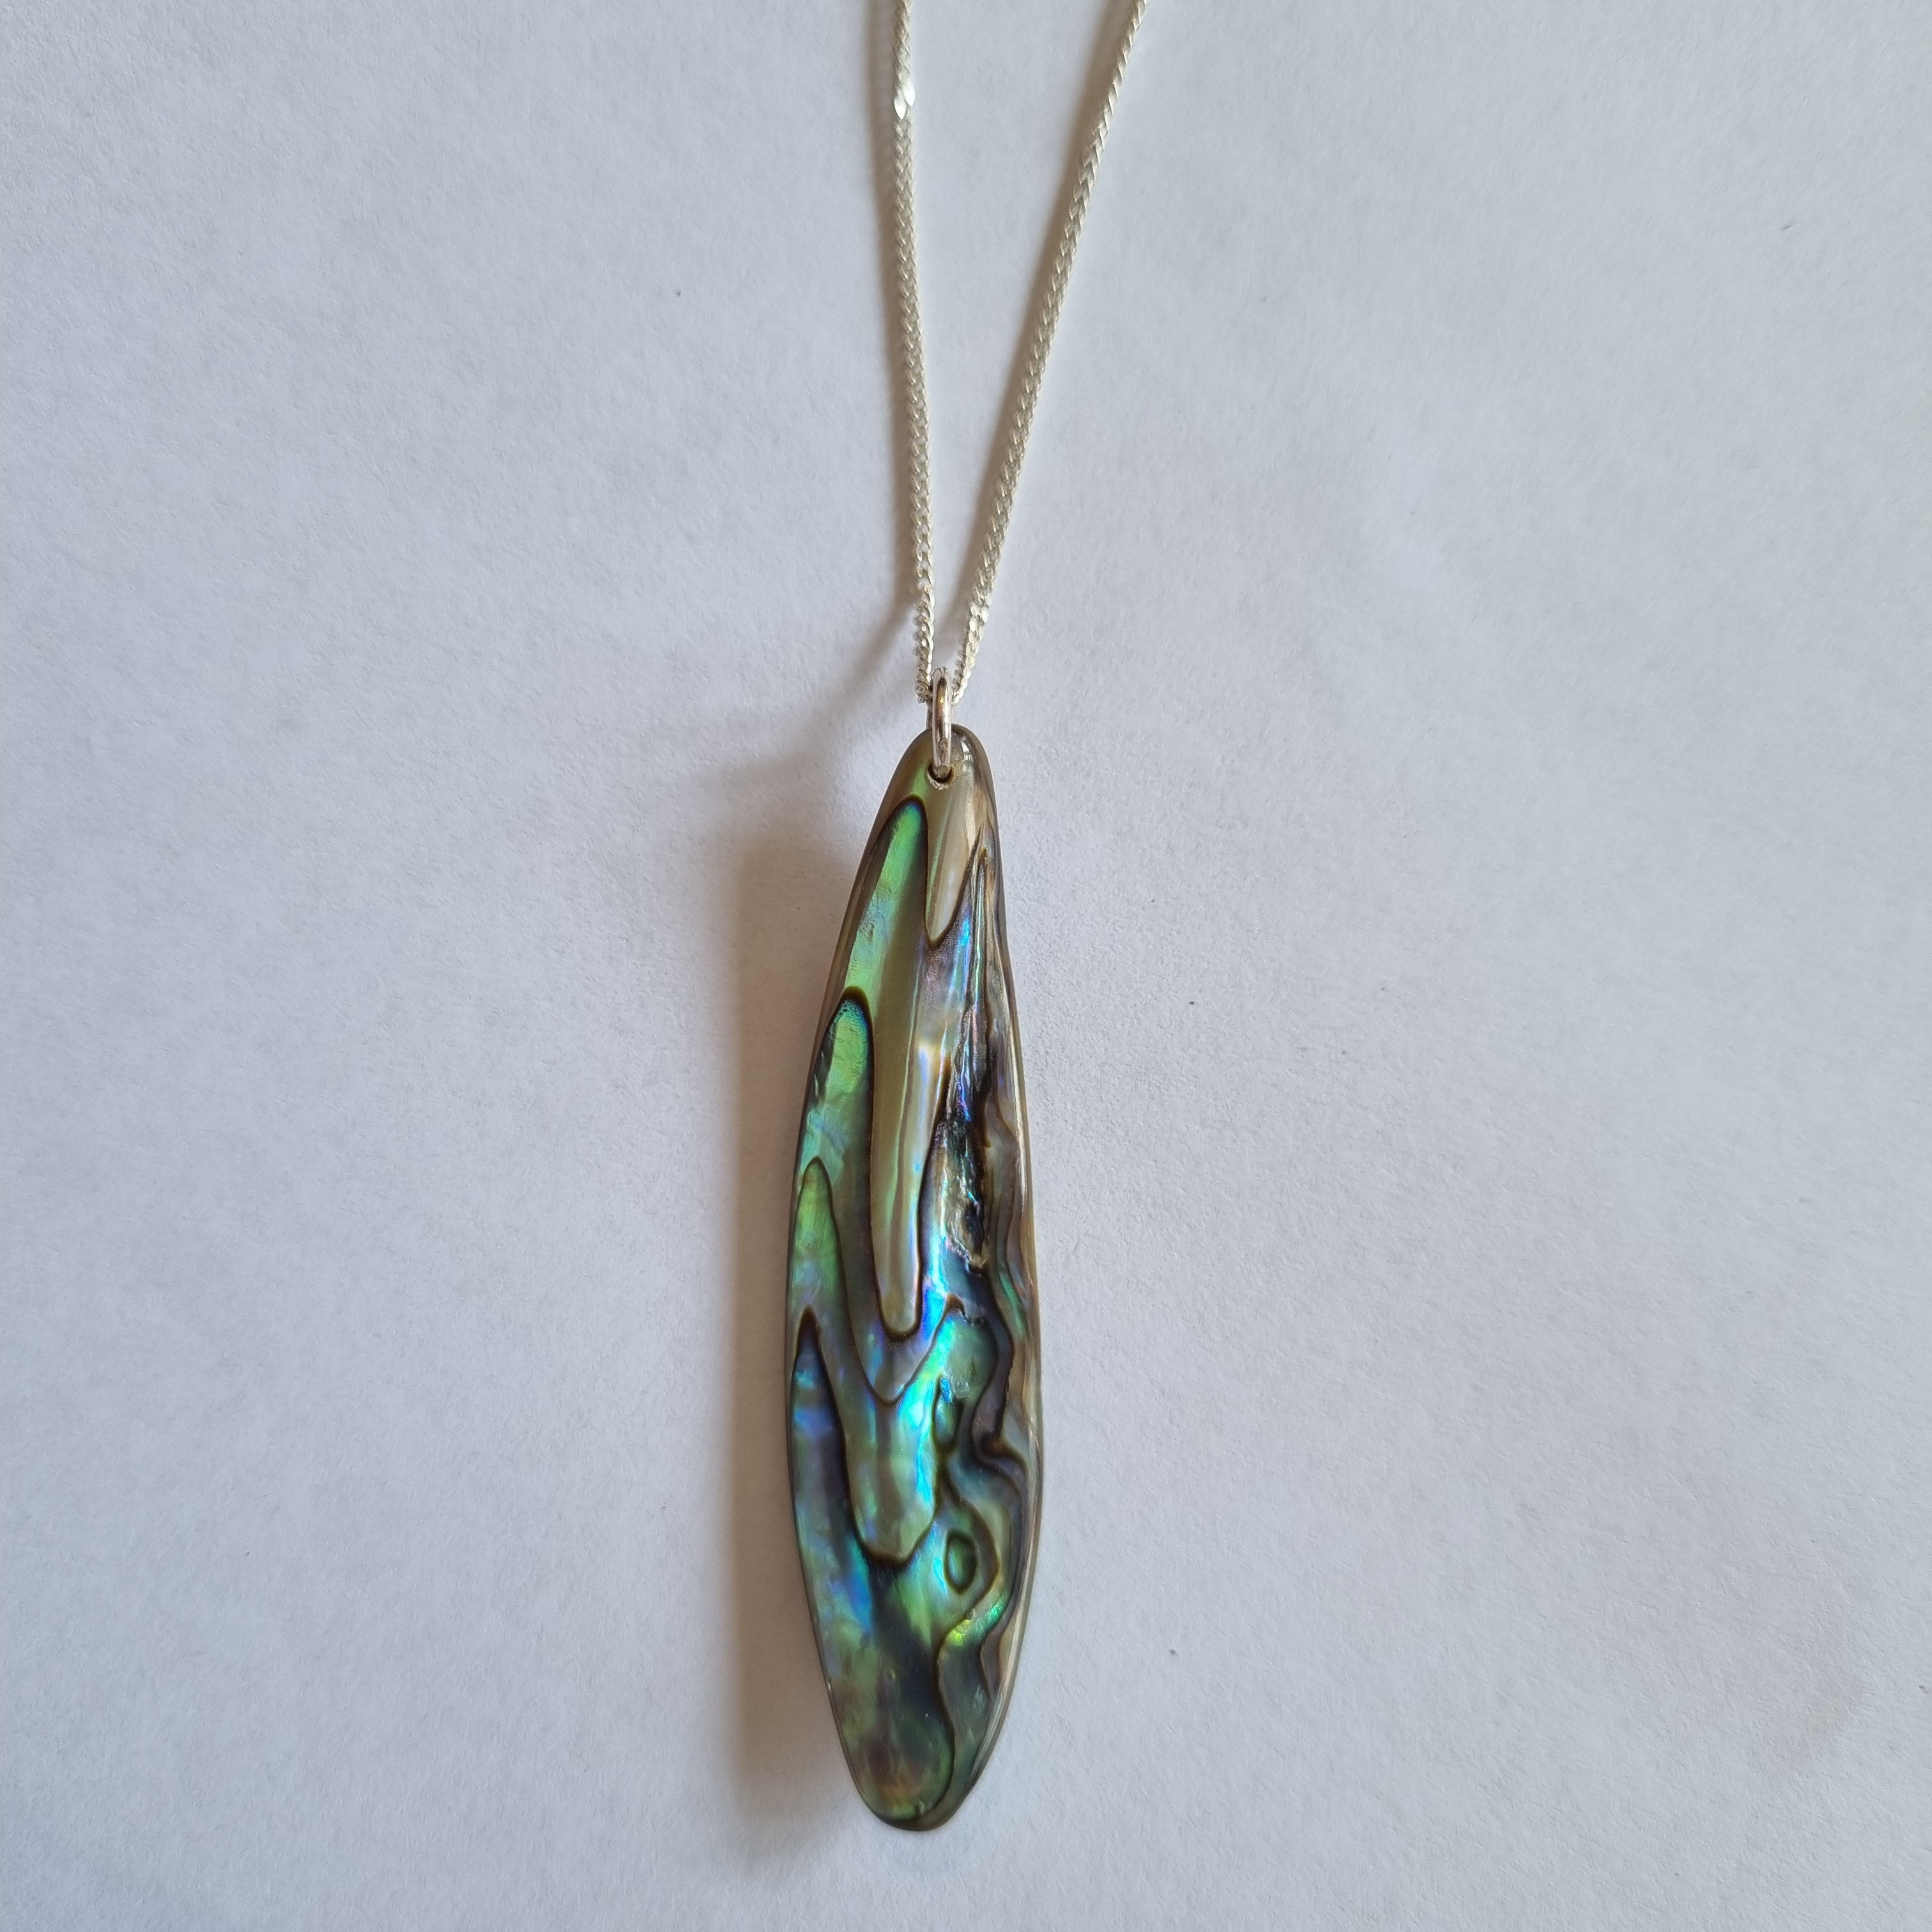 Paua necklace on silver chain